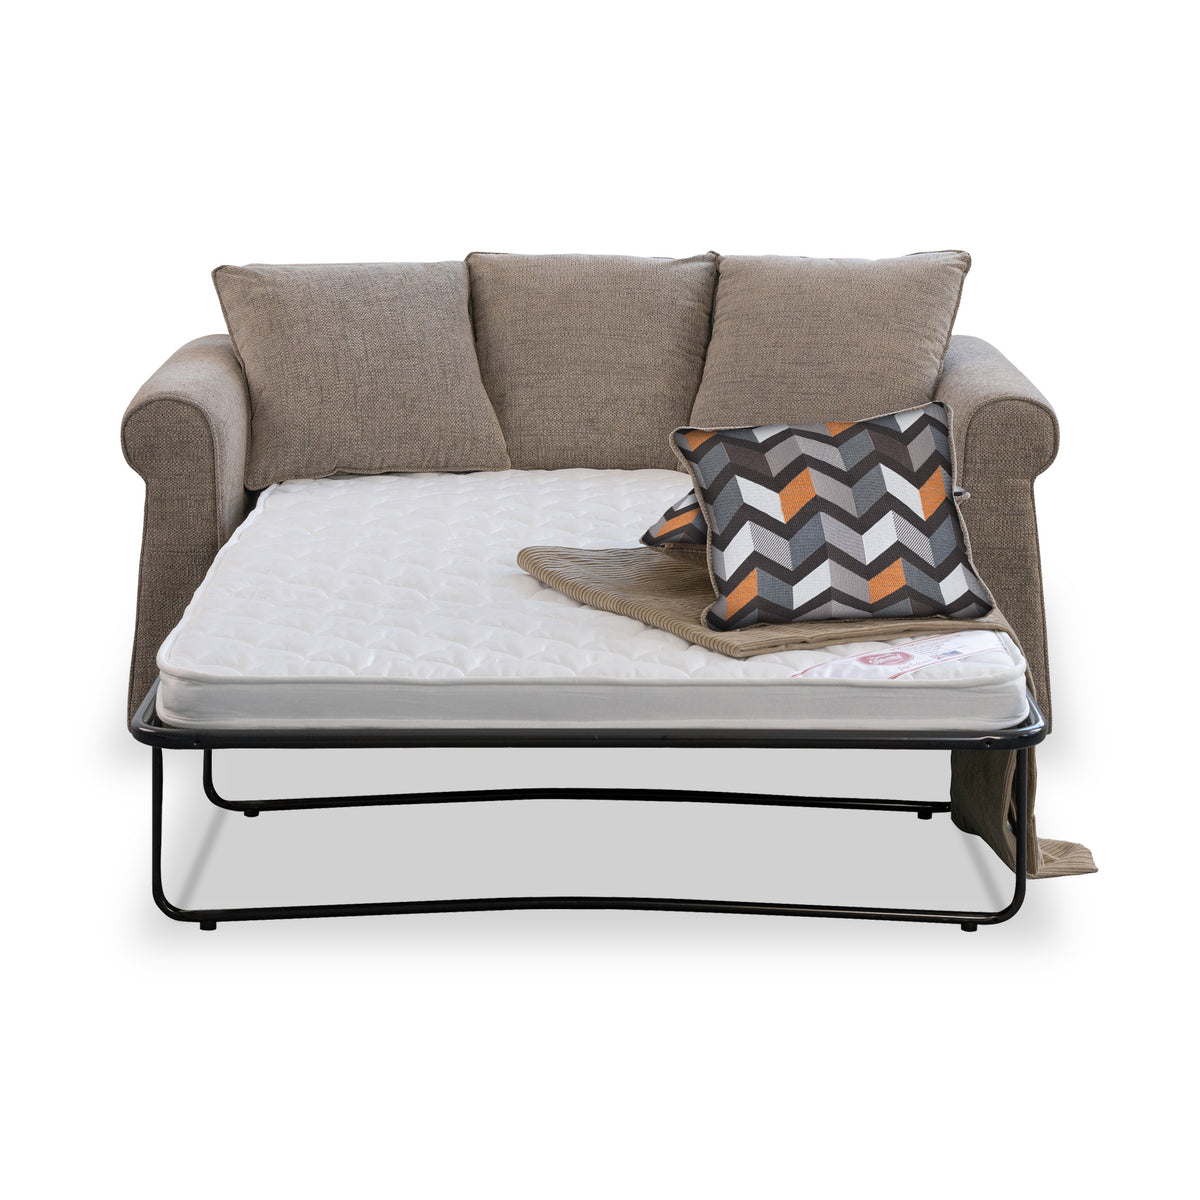 Branston Fawn  Soft Weave 2 Seater Sofabed with Charcoal Scatter Cushions from Roseland Furniture